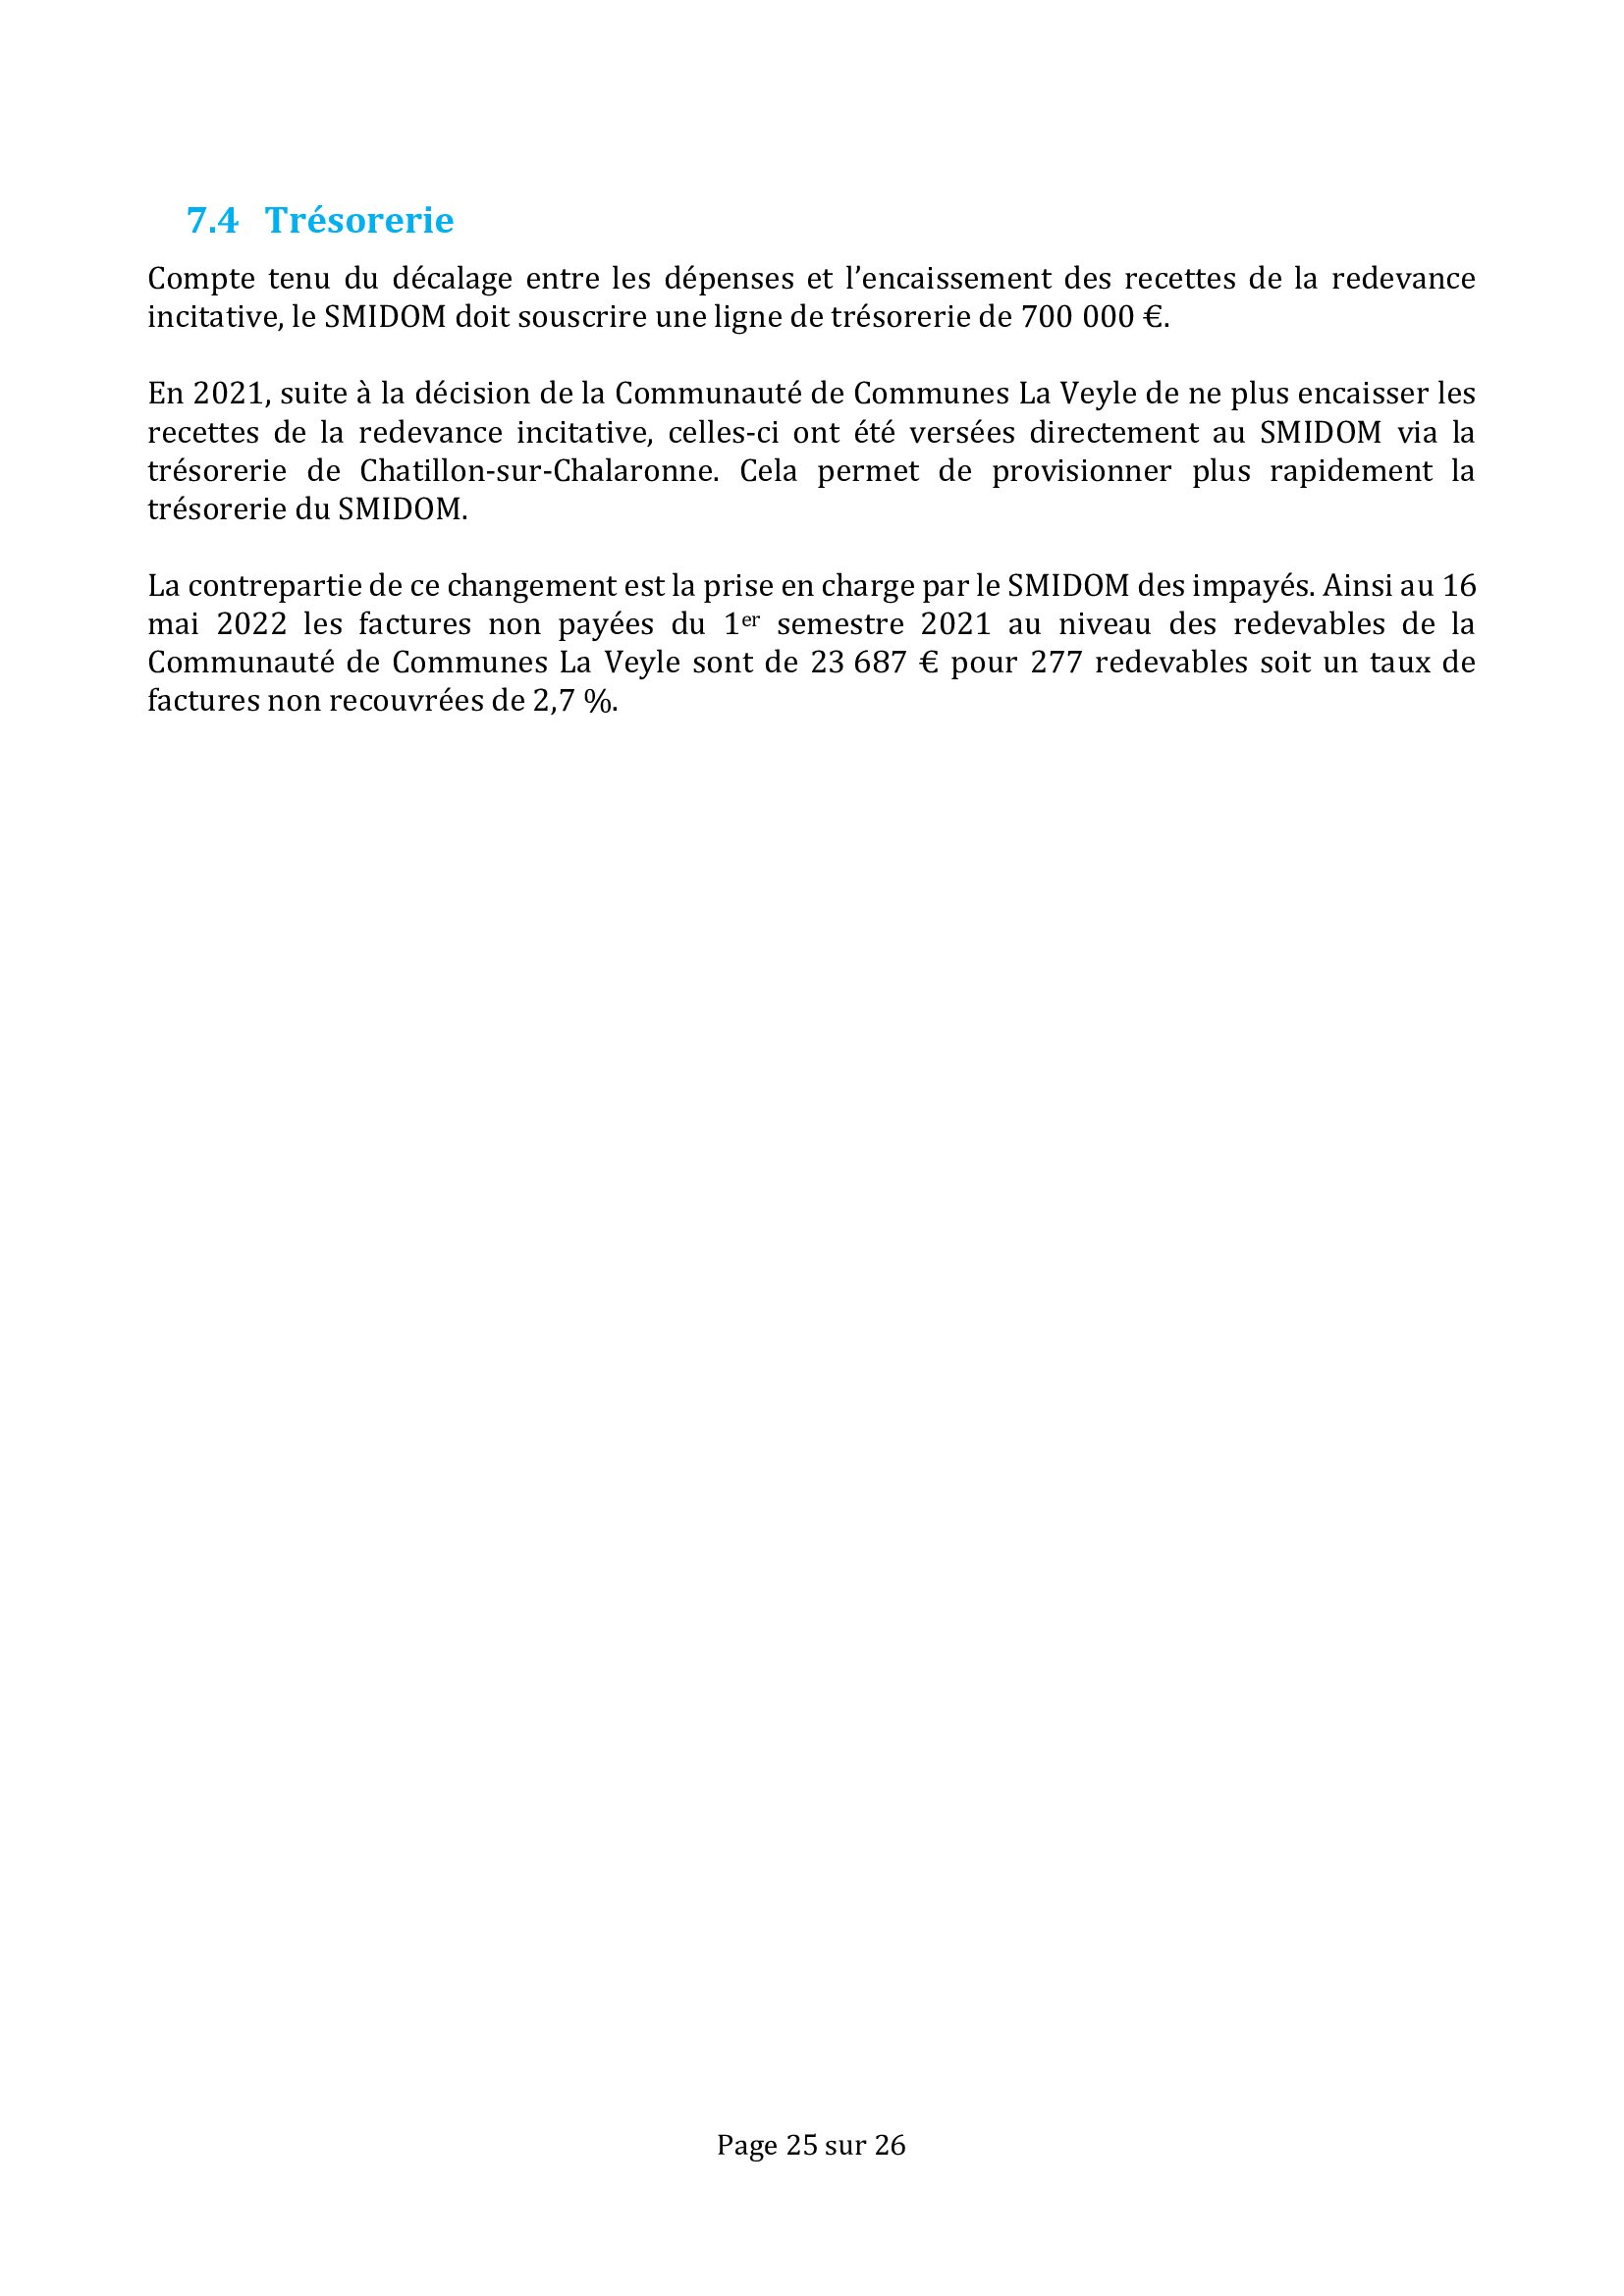 2021 - Rapport annuel - page 25.jpg